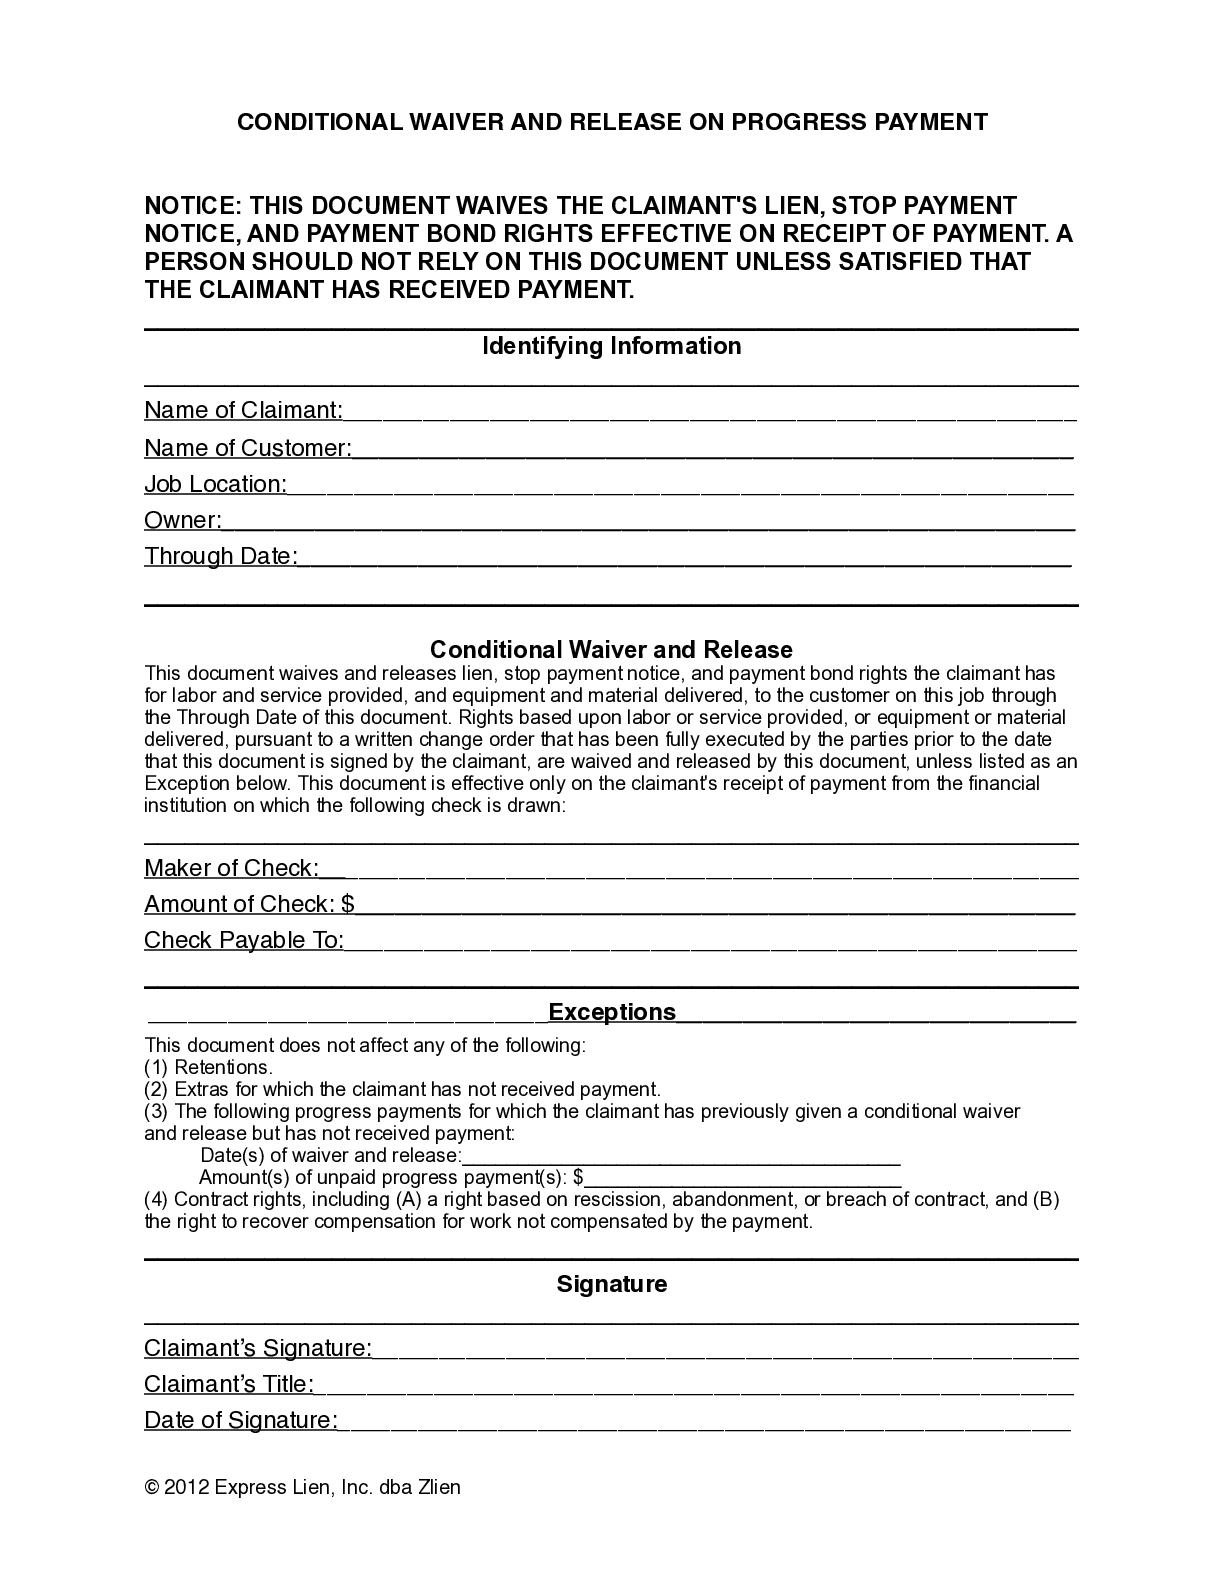 Ohio Partial Conditional Lien Waiver Form - free from